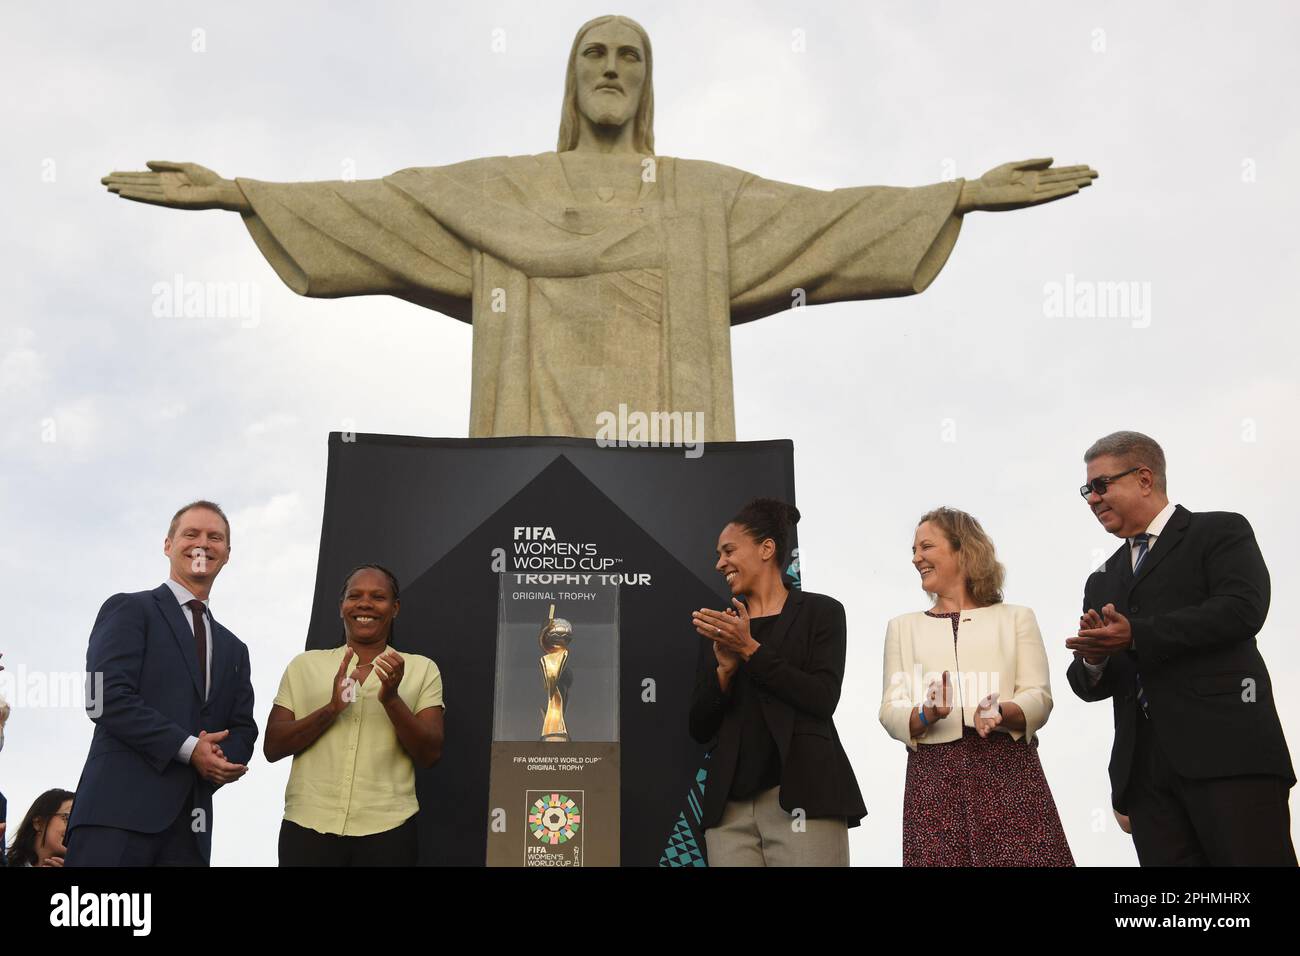 Rio De Janeiro, Brazil. 29th Mar, 2023. RIO DE JANEIRO (RJ), 03/29/2023 - SPORT/FOOTBALL/BRAZIL/TROPHY - Presentation of the FIFA Women's World Cup Australia New Zealand 2023 trophy to Brazilians, in a ceremony held at the Cristo Redentor Sanctuary, a traditional tourist spot in Rio, on the morning of this Wednesday (29). The event was attended by legends of women's football, such as Formiga, Aline Pellegrino and the coach of the Brazilian national team, Pia Sundhage. 31119 (Alexandre Brum/Ag. Enquadrar/SPP) Credit: SPP Sport Press Photo. /Alamy Live News Stock Photo